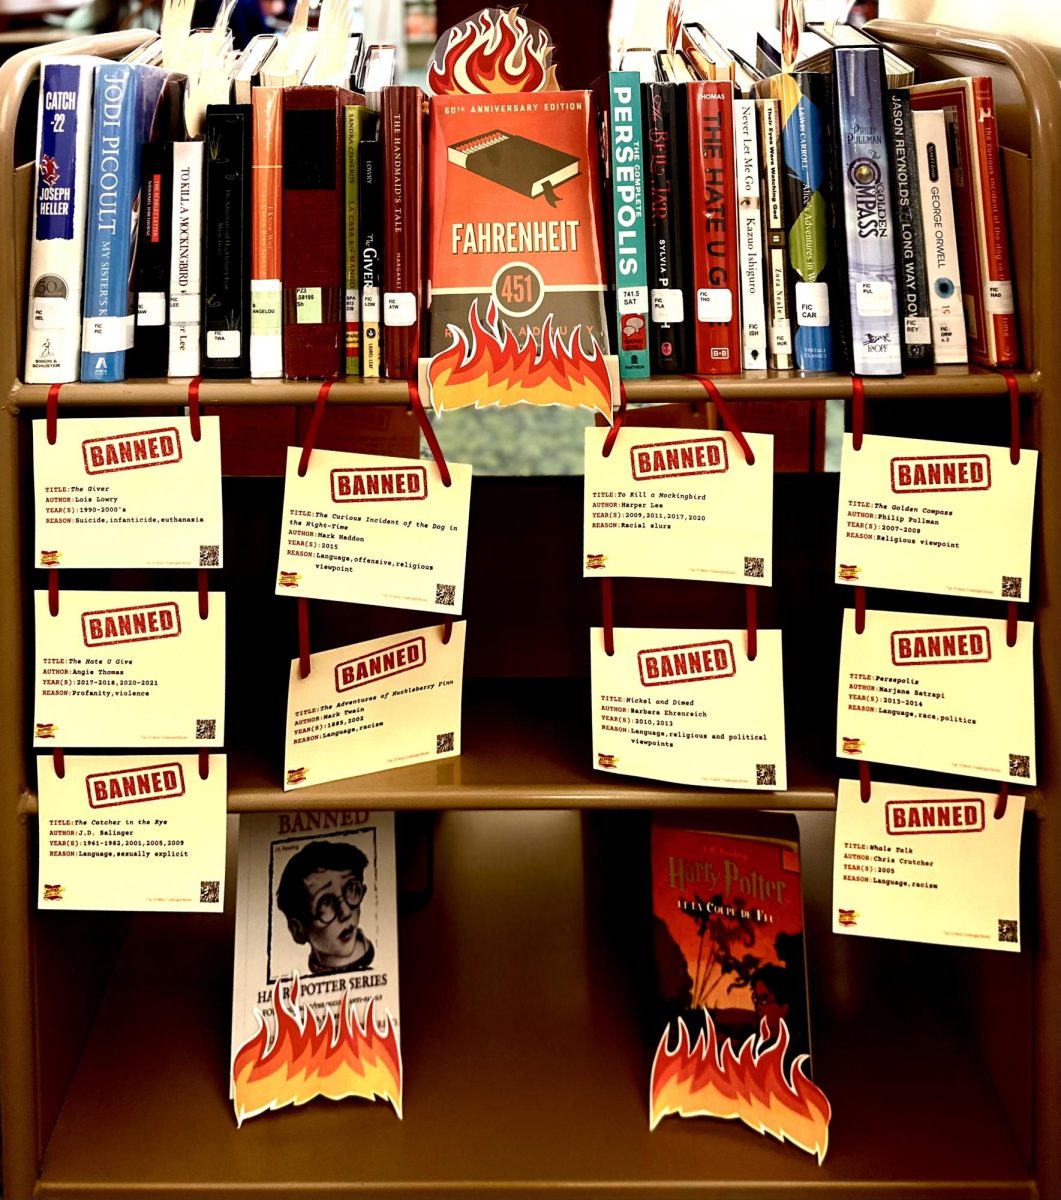 Carrolltons Upper School Library displays books that have been banned during banned books week.